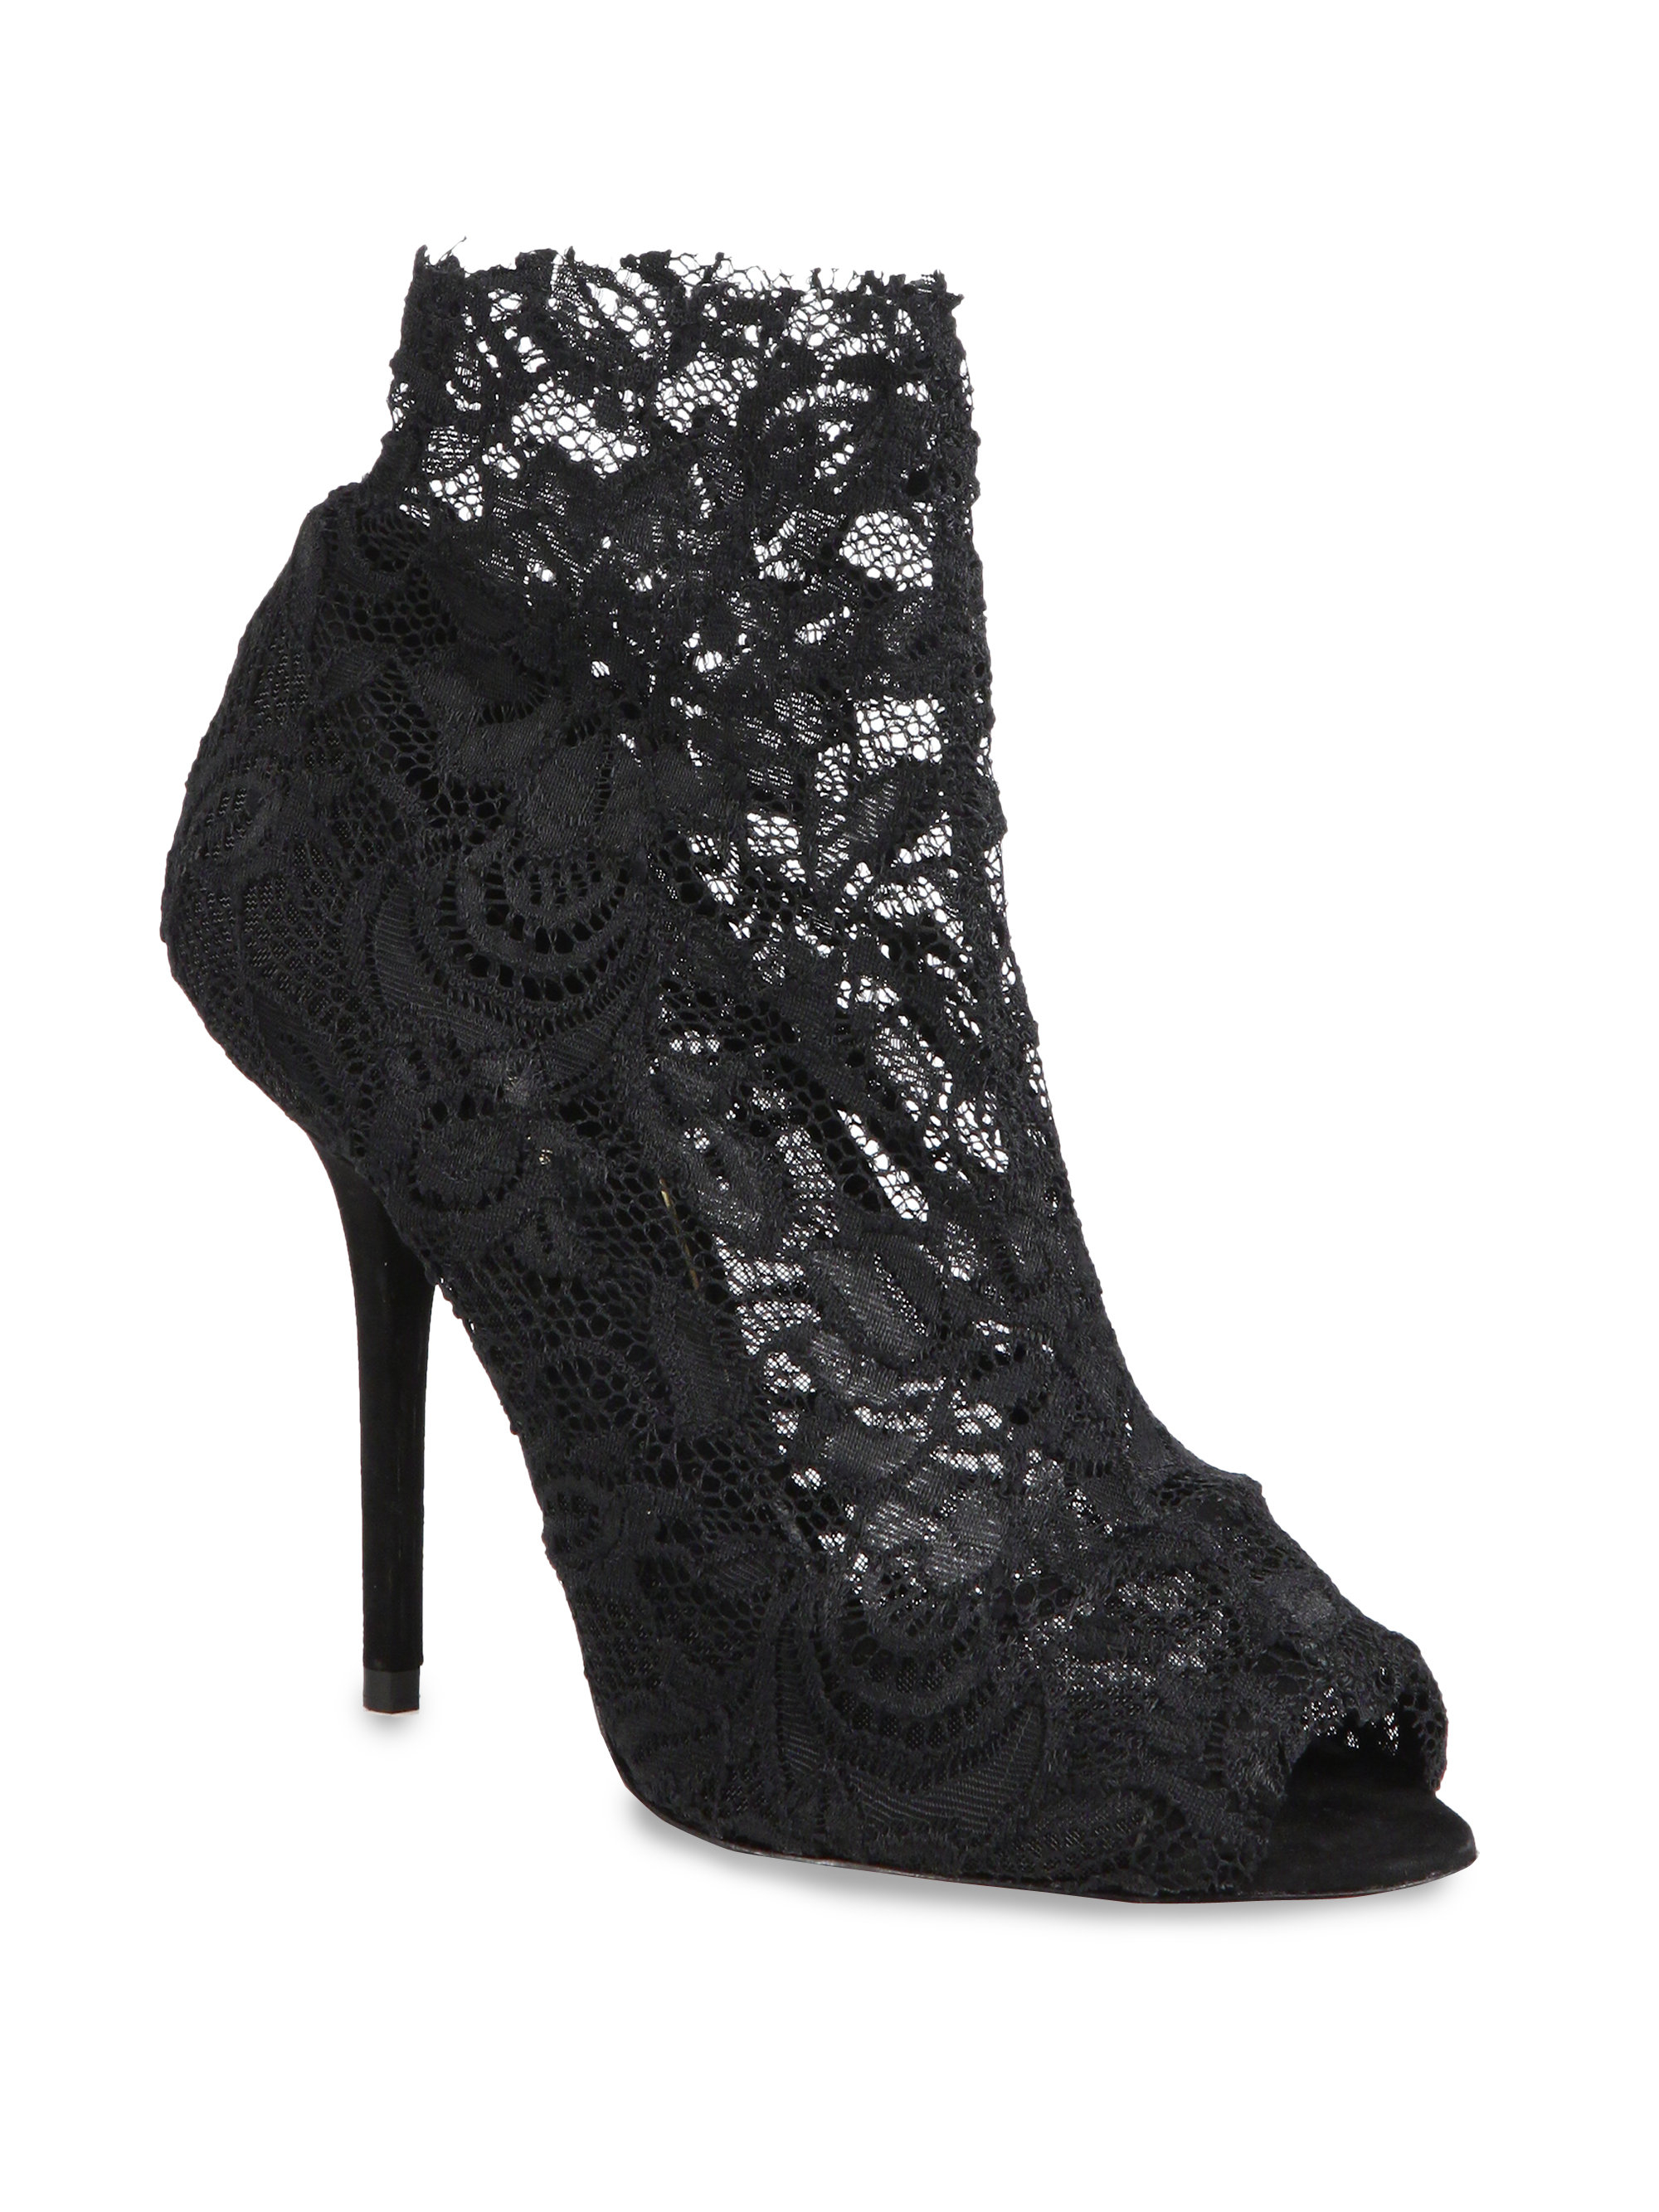 Lyst - Dolce & Gabbana Stretchy Lace Booties in Black